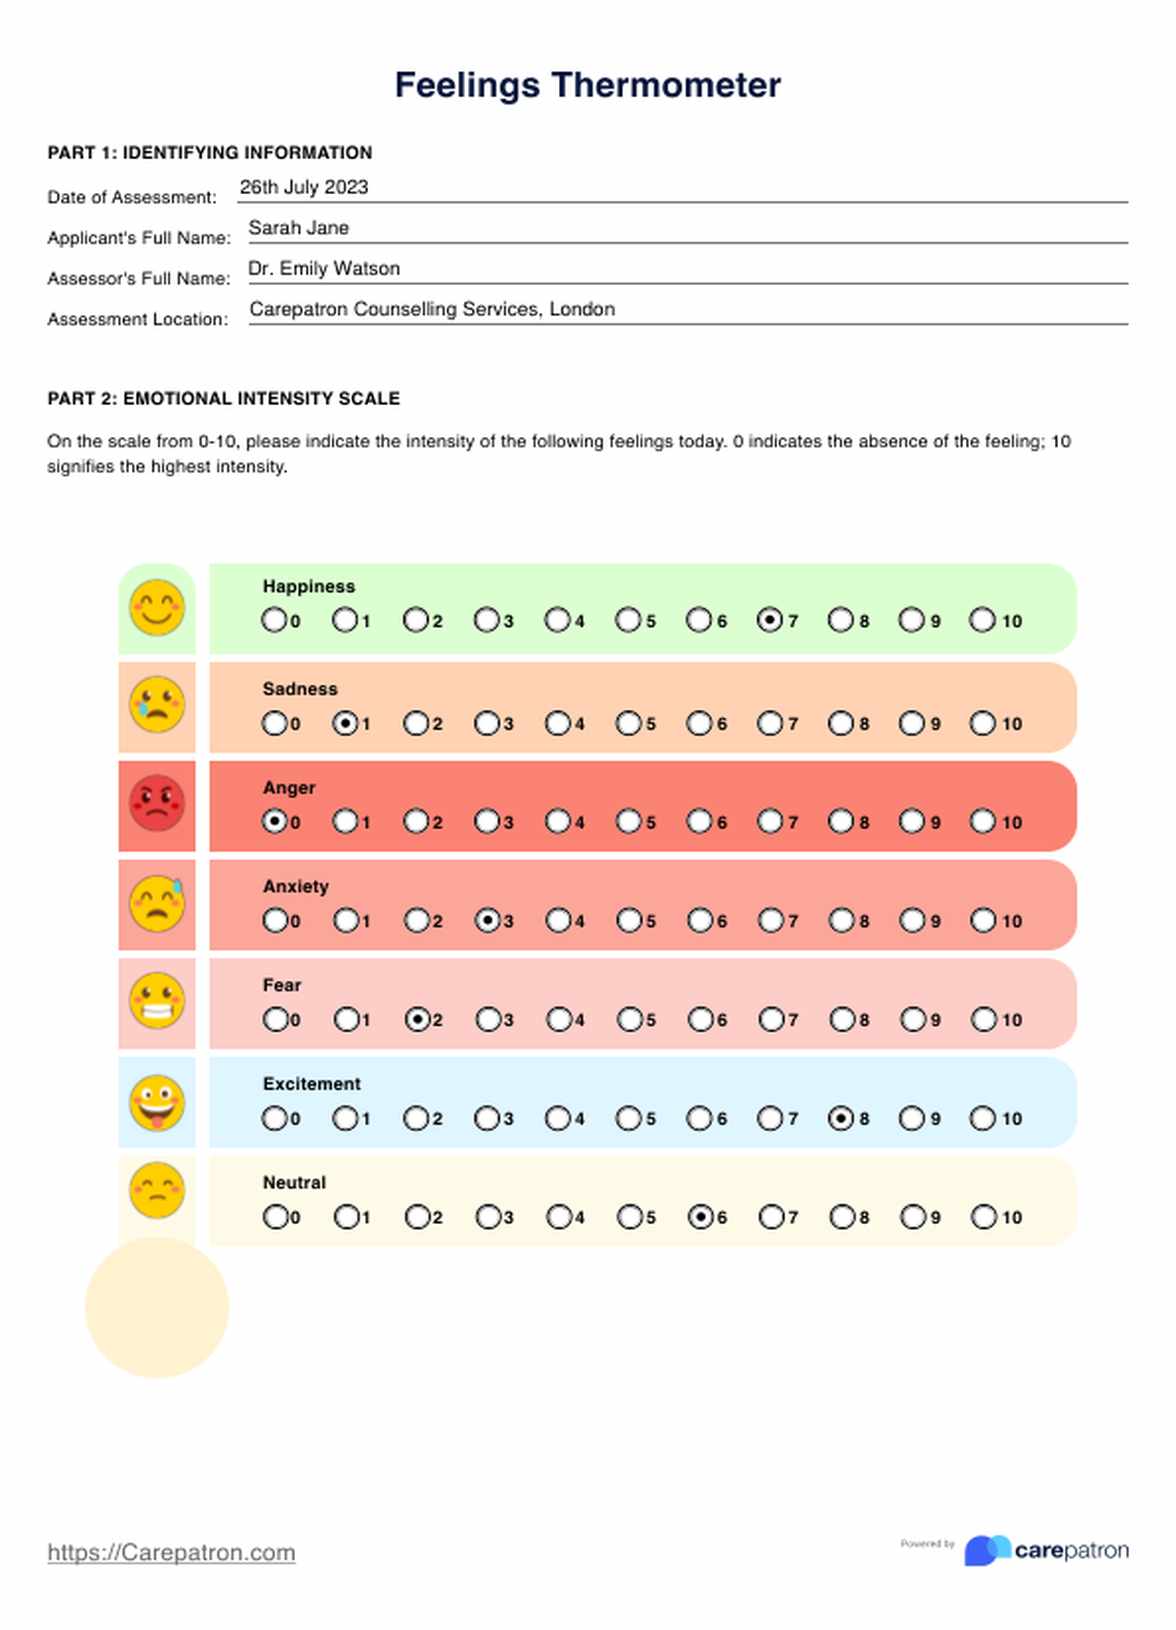 Feelings Thermometer PDF Example